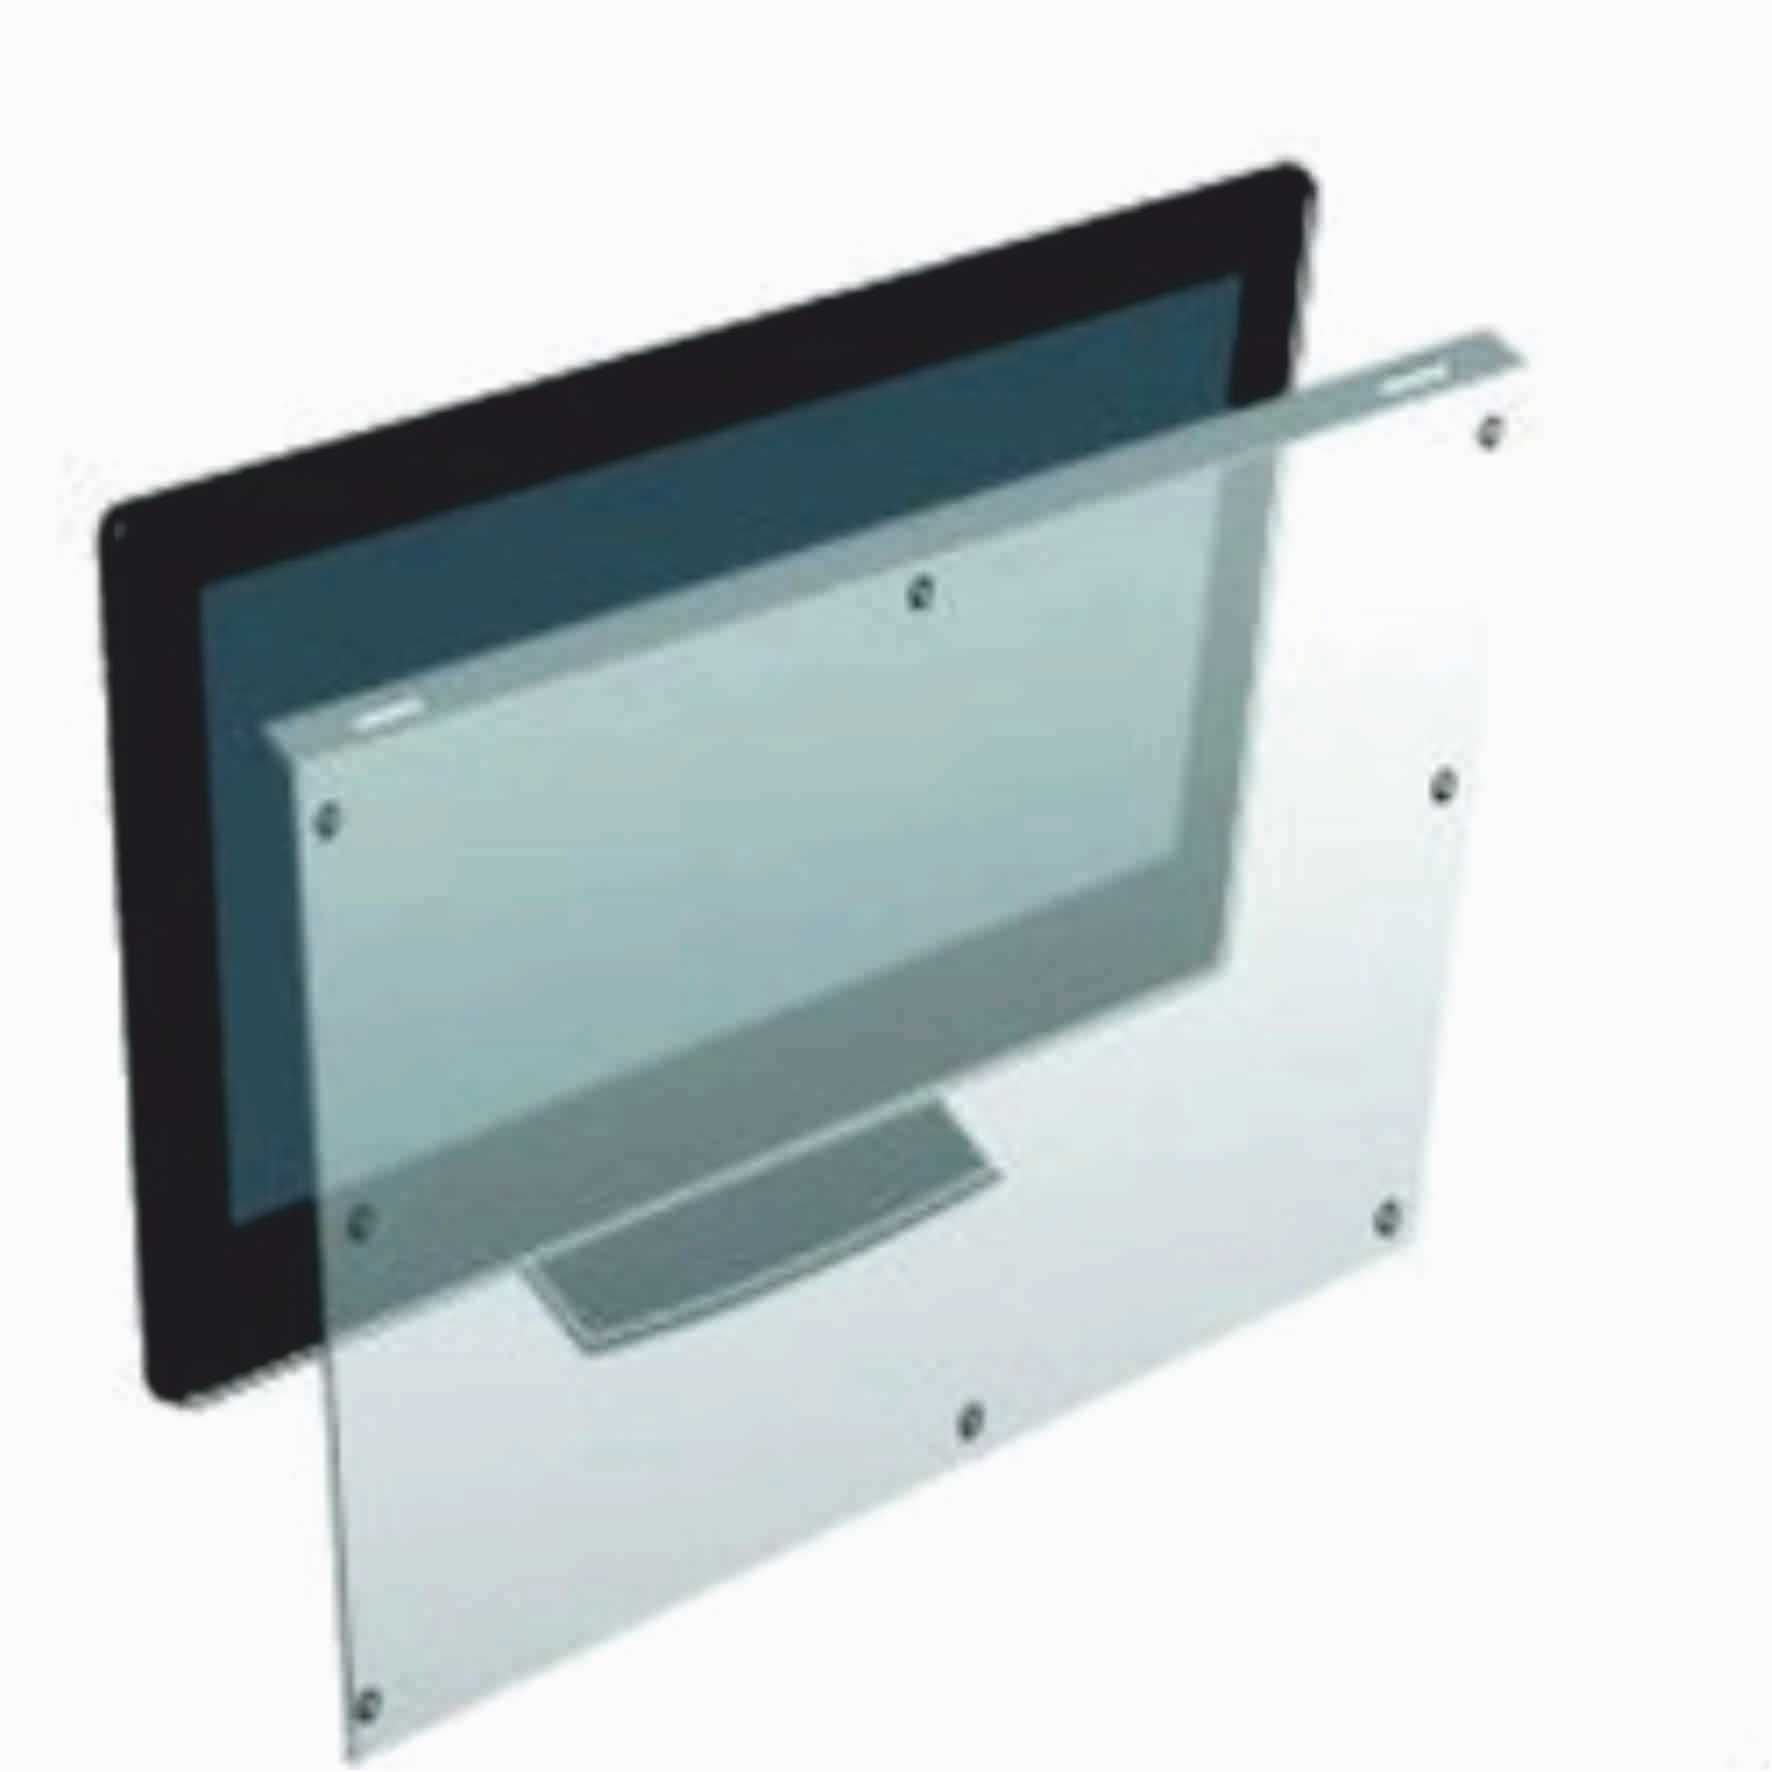 32 Inch TVGUARD NonBreakable Screen Protector For LED LCD 3D Plasma TV at Best Prices